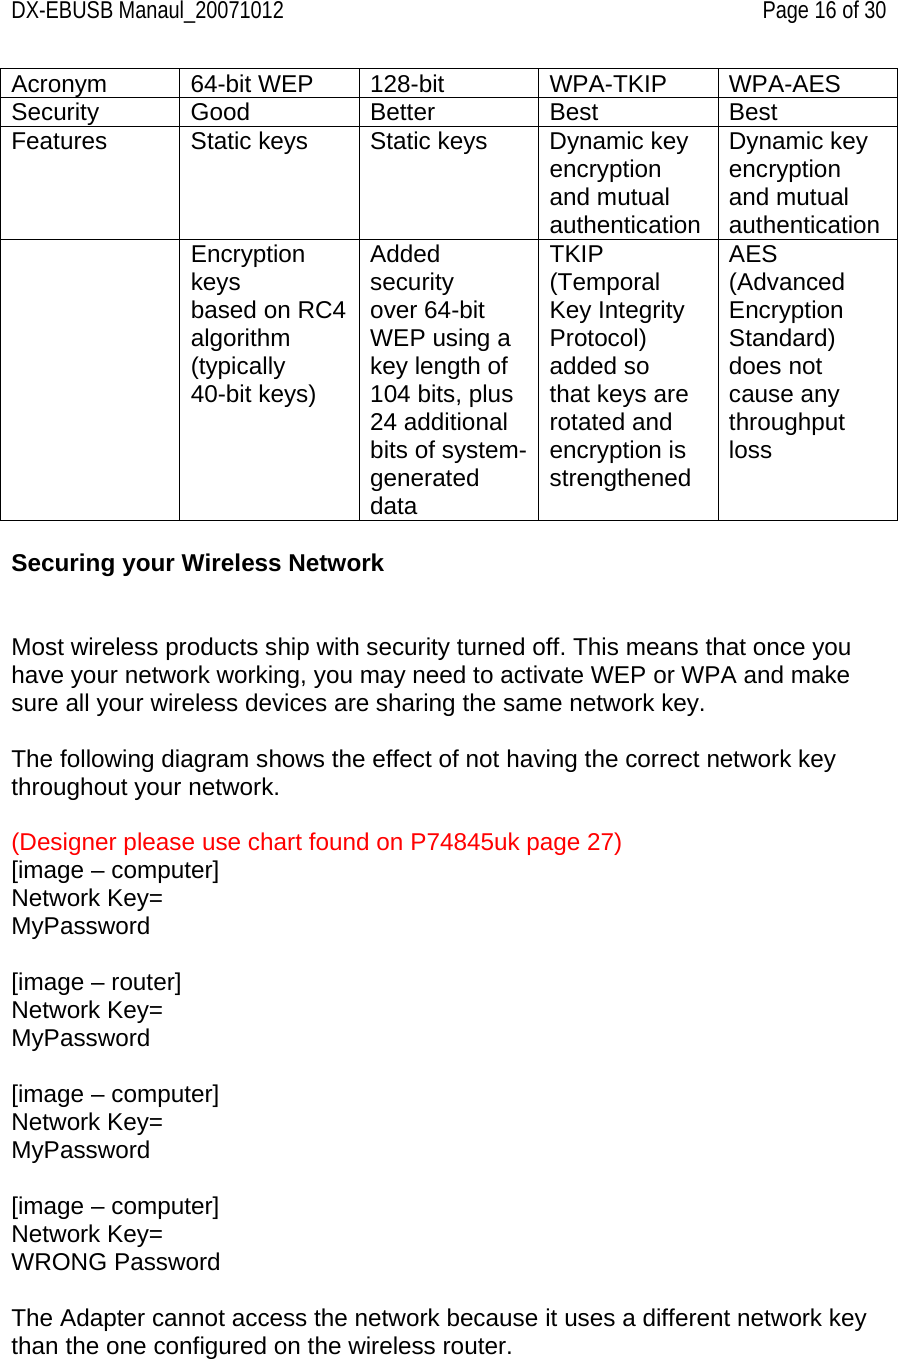 DX-EBUSB Manaul_20071012    Page 16 of 30 Acronym 64-bit WEP 128-bit  WPA-TKIP WPA-AES Security Good  Better  Best  Best Features  Static keys Static keys Dynamic key encryption and mutual authenticationDynamic key encryption and mutual authentication Encryption keys based on RC4algorithm (typically 40-bit keys) Added security over 64-bit WEP using a key length of 104 bits, plus 24 additional bits of system- generated data TKIP (Temporal Key Integrity Protocol) added so that keys are rotated and encryption is strengthened AES (Advanced Encryption Standard) does not cause any throughput loss  Securing your Wireless Network   Most wireless products ship with security turned off. This means that once you have your network working, you may need to activate WEP or WPA and make sure all your wireless devices are sharing the same network key.  The following diagram shows the effect of not having the correct network key throughout your network.  (Designer please use chart found on P74845uk page 27) [image – computer] Network Key= MyPassword  [image – router] Network Key= MyPassword  [image – computer] Network Key= MyPassword  [image – computer] Network Key= WRONG Password  The Adapter cannot access the network because it uses a different network key than the one configured on the wireless router. 